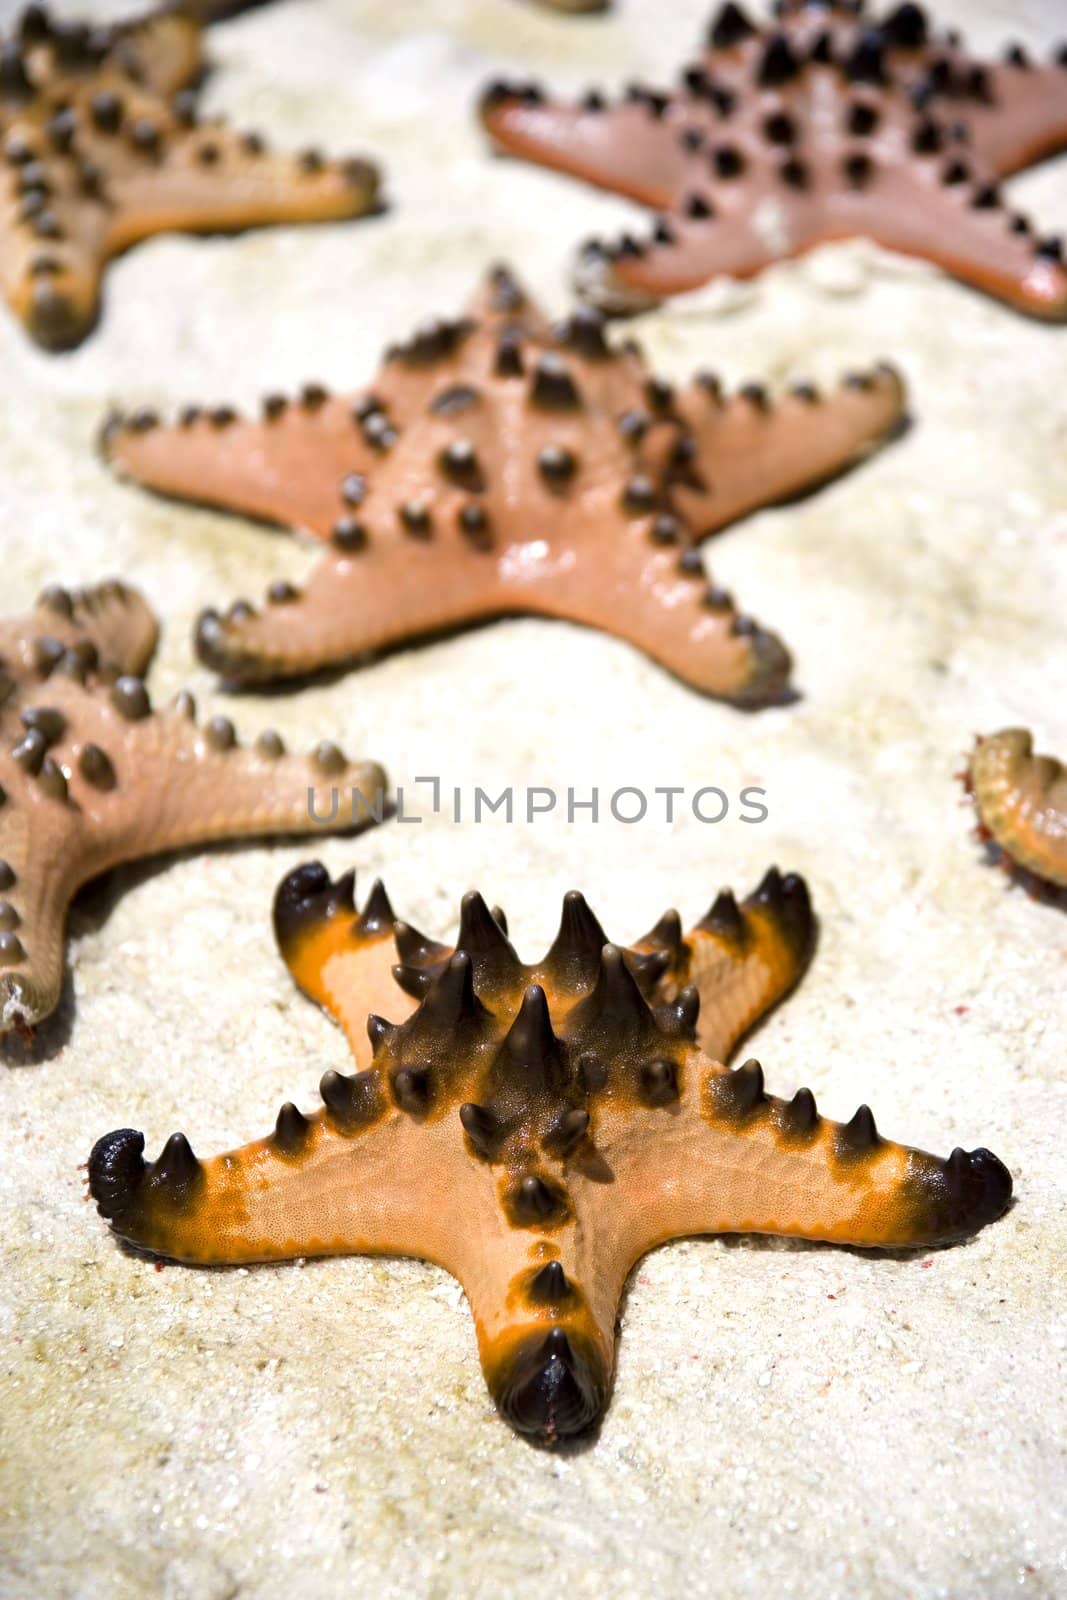 Image of a live starfish stranded on sand.